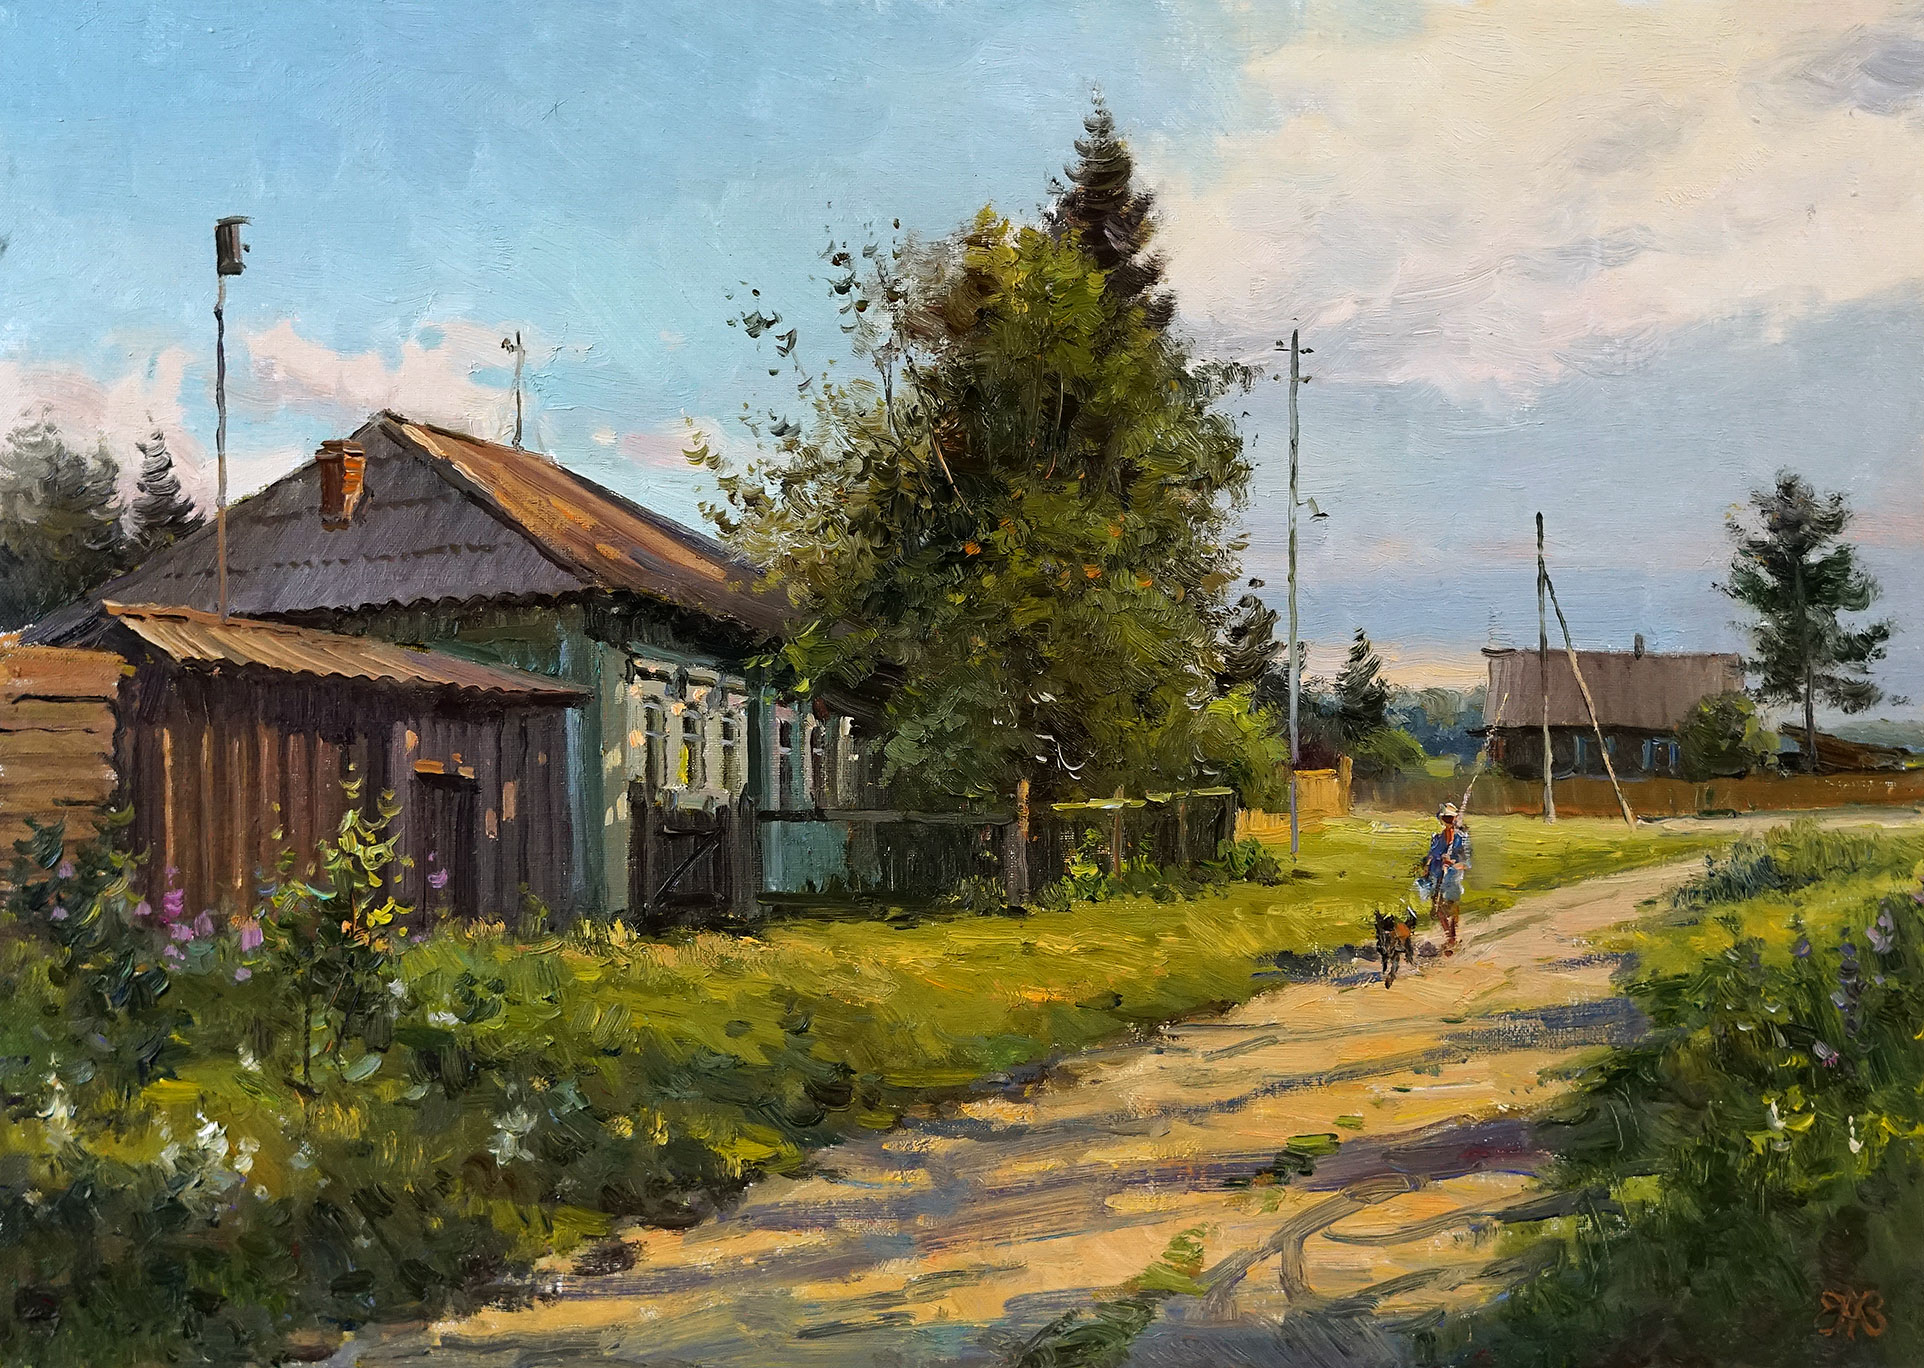 For the evening bite - 1, Alexey Efremov, Buy the painting Oil